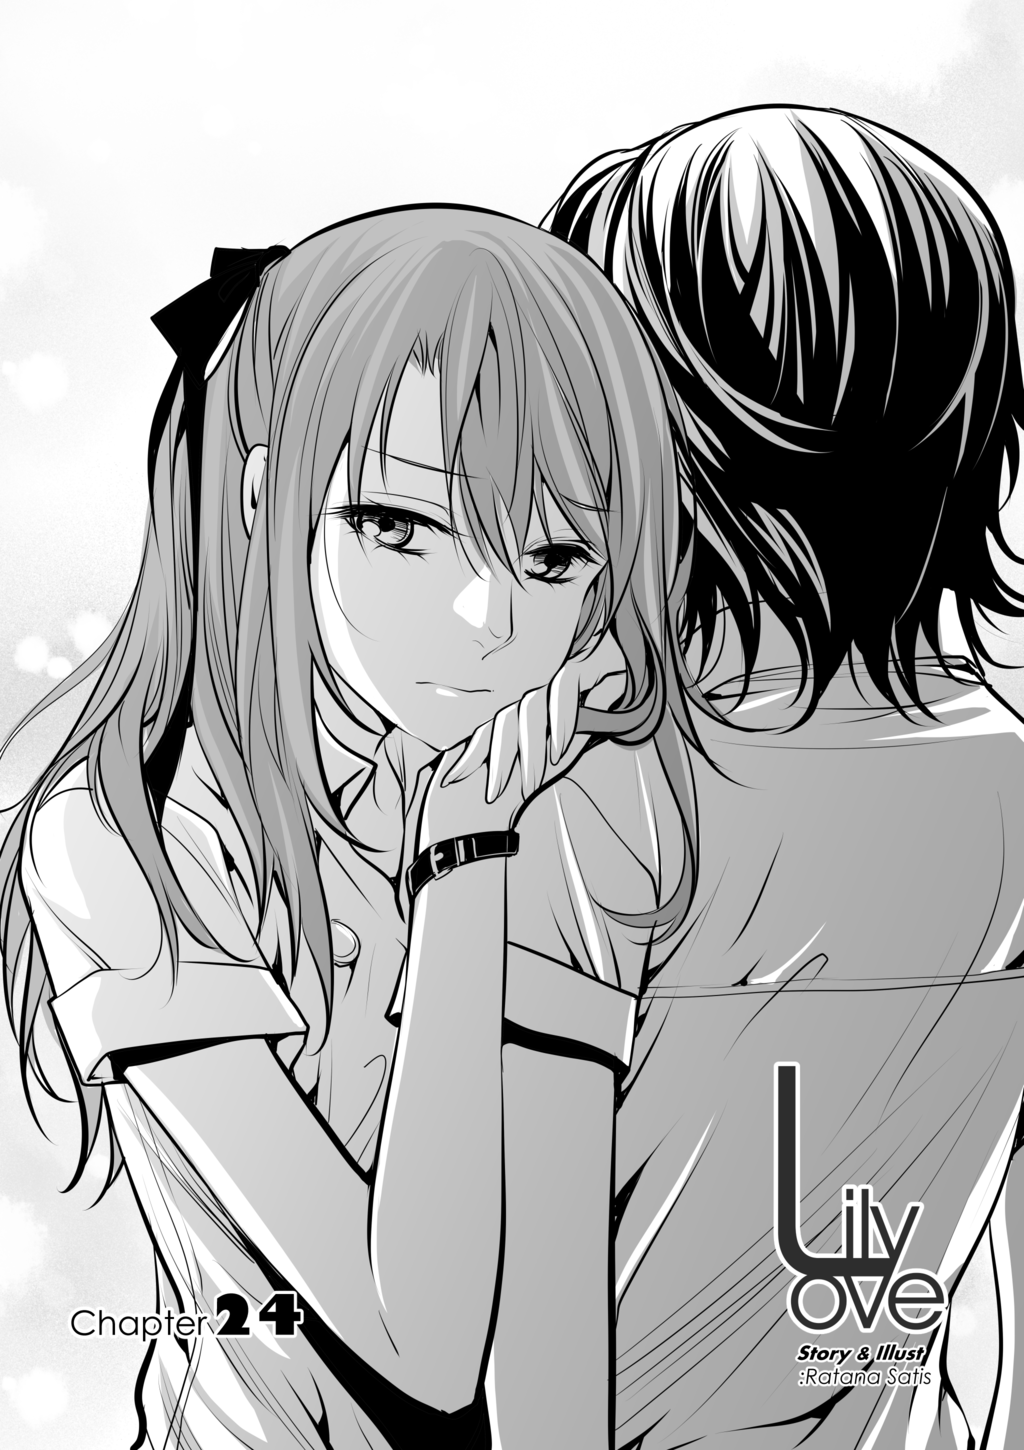   Lily Love Chapter 24 - RAWS are here :D (log in via FB to see or create account